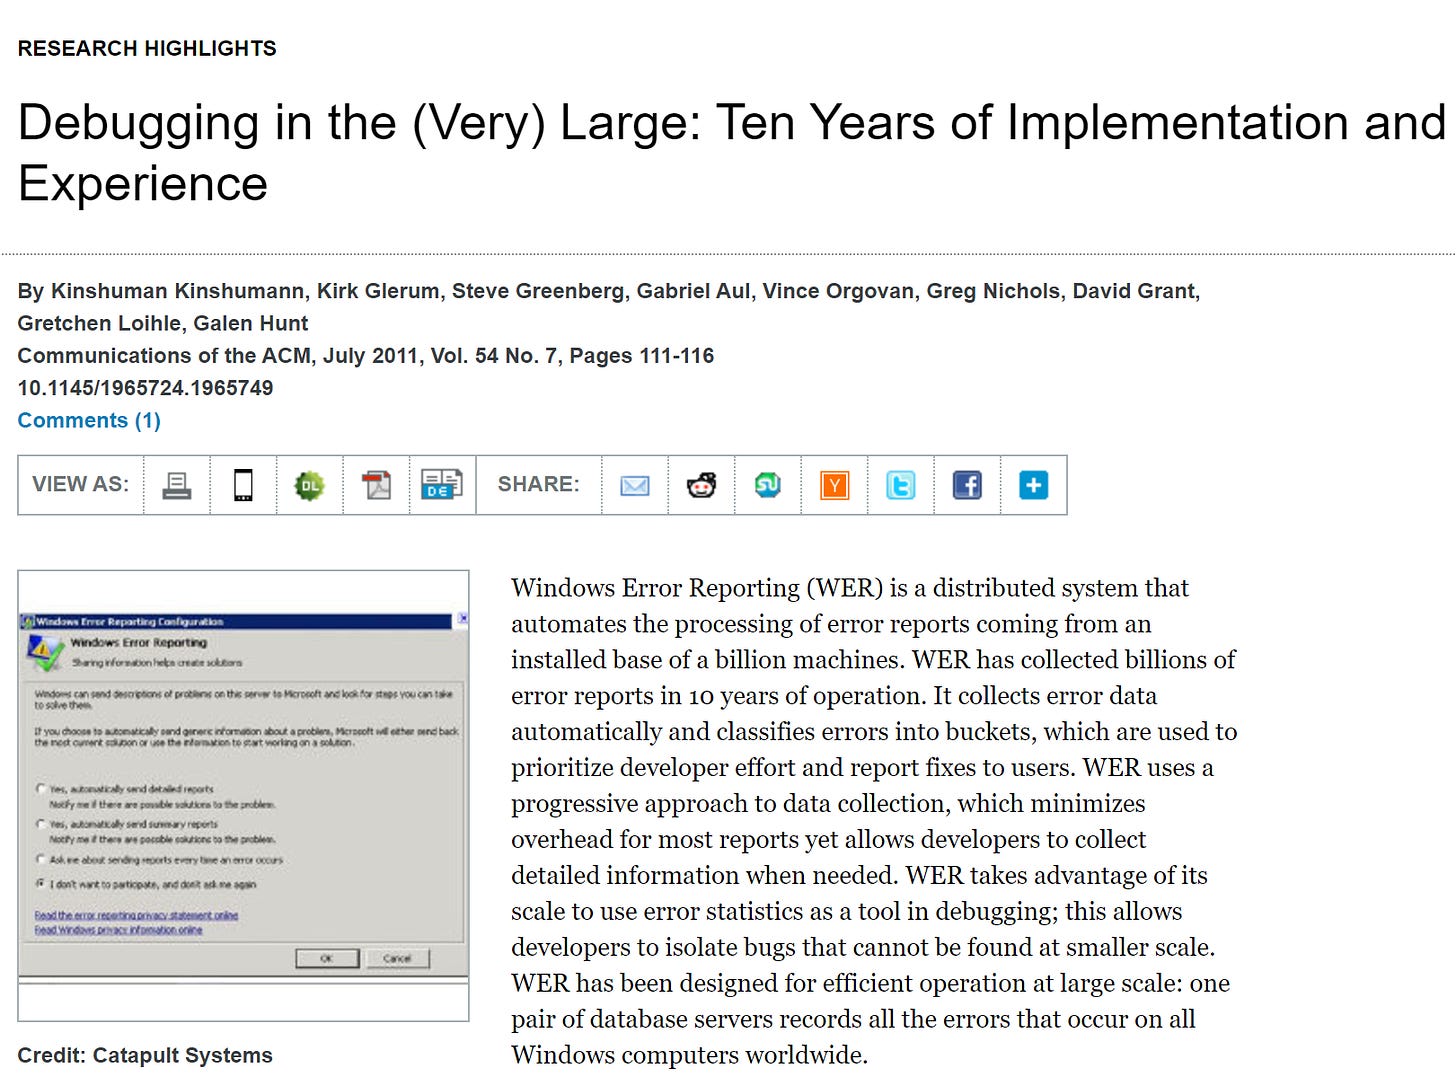 Debugging in the (Very) Large: Ten Years of Implementation and Experience Kirk Glerum, Kinshuman Kinshumann, Steve Greenberg, Gabriel Aul,  Vince Orgovan, Greg Nichols, David Grant, Gretchen Loihle, and Galen Hunt Microsoft Corporation One Microsoft Way Redmond, WA 98052 ABSTRACT Windows Error Reporting (WER) is a distributed system  that automates the processing of error reports coming from  an installed base of a billion machines. WER has collected  billions of error reports in ten years of operation. It collects  error data automatically and classifies errors into buckets,  which are used to prioritize developer effort and report  fixes to users. WER uses a progressive approach to data  collection, which minimizes overhead for most reports yet  allows developers to collect detailed information when  needed. WER takes advantage of its scale to use error  statistics as a tool in debugging; this allows developers to  isolate bugs that could not be found at smaller scale. WER  has been designed for large scale: one pair of database  servers can record all the errors that occur on all Windows  computers worldwide